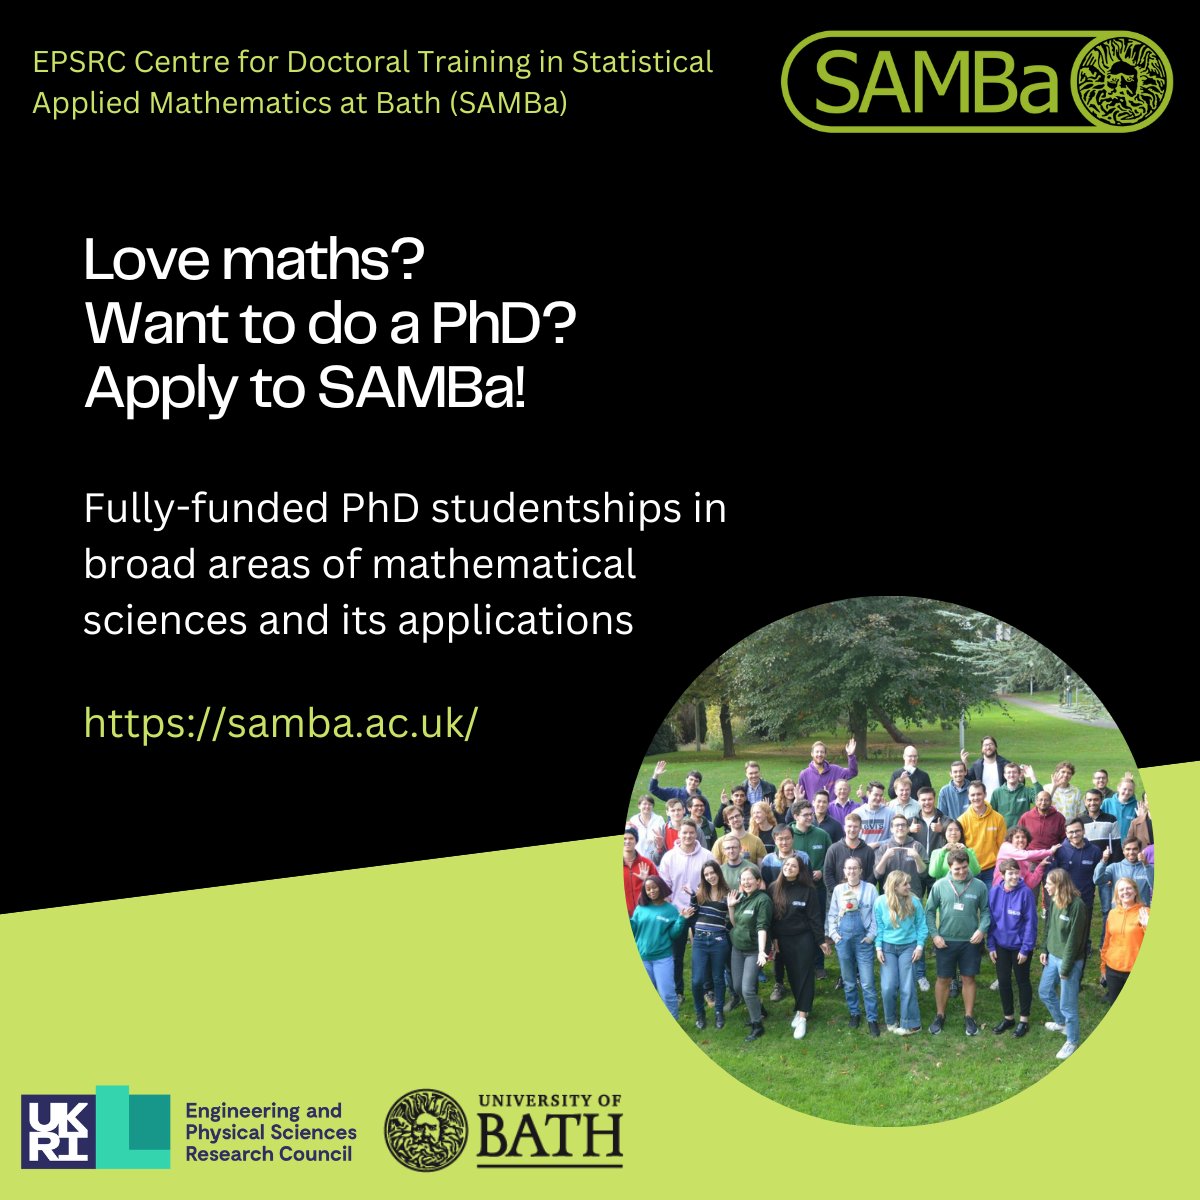 If you would like to do a maths PhD (or know someone who might), take a look at SAMBa: samba.ac.uk Join a diverse cohort to choose and shape your research direction in an inclusive, supportive environment. Apply now to start in Sept 2024. @MathsatBath @UniofBath